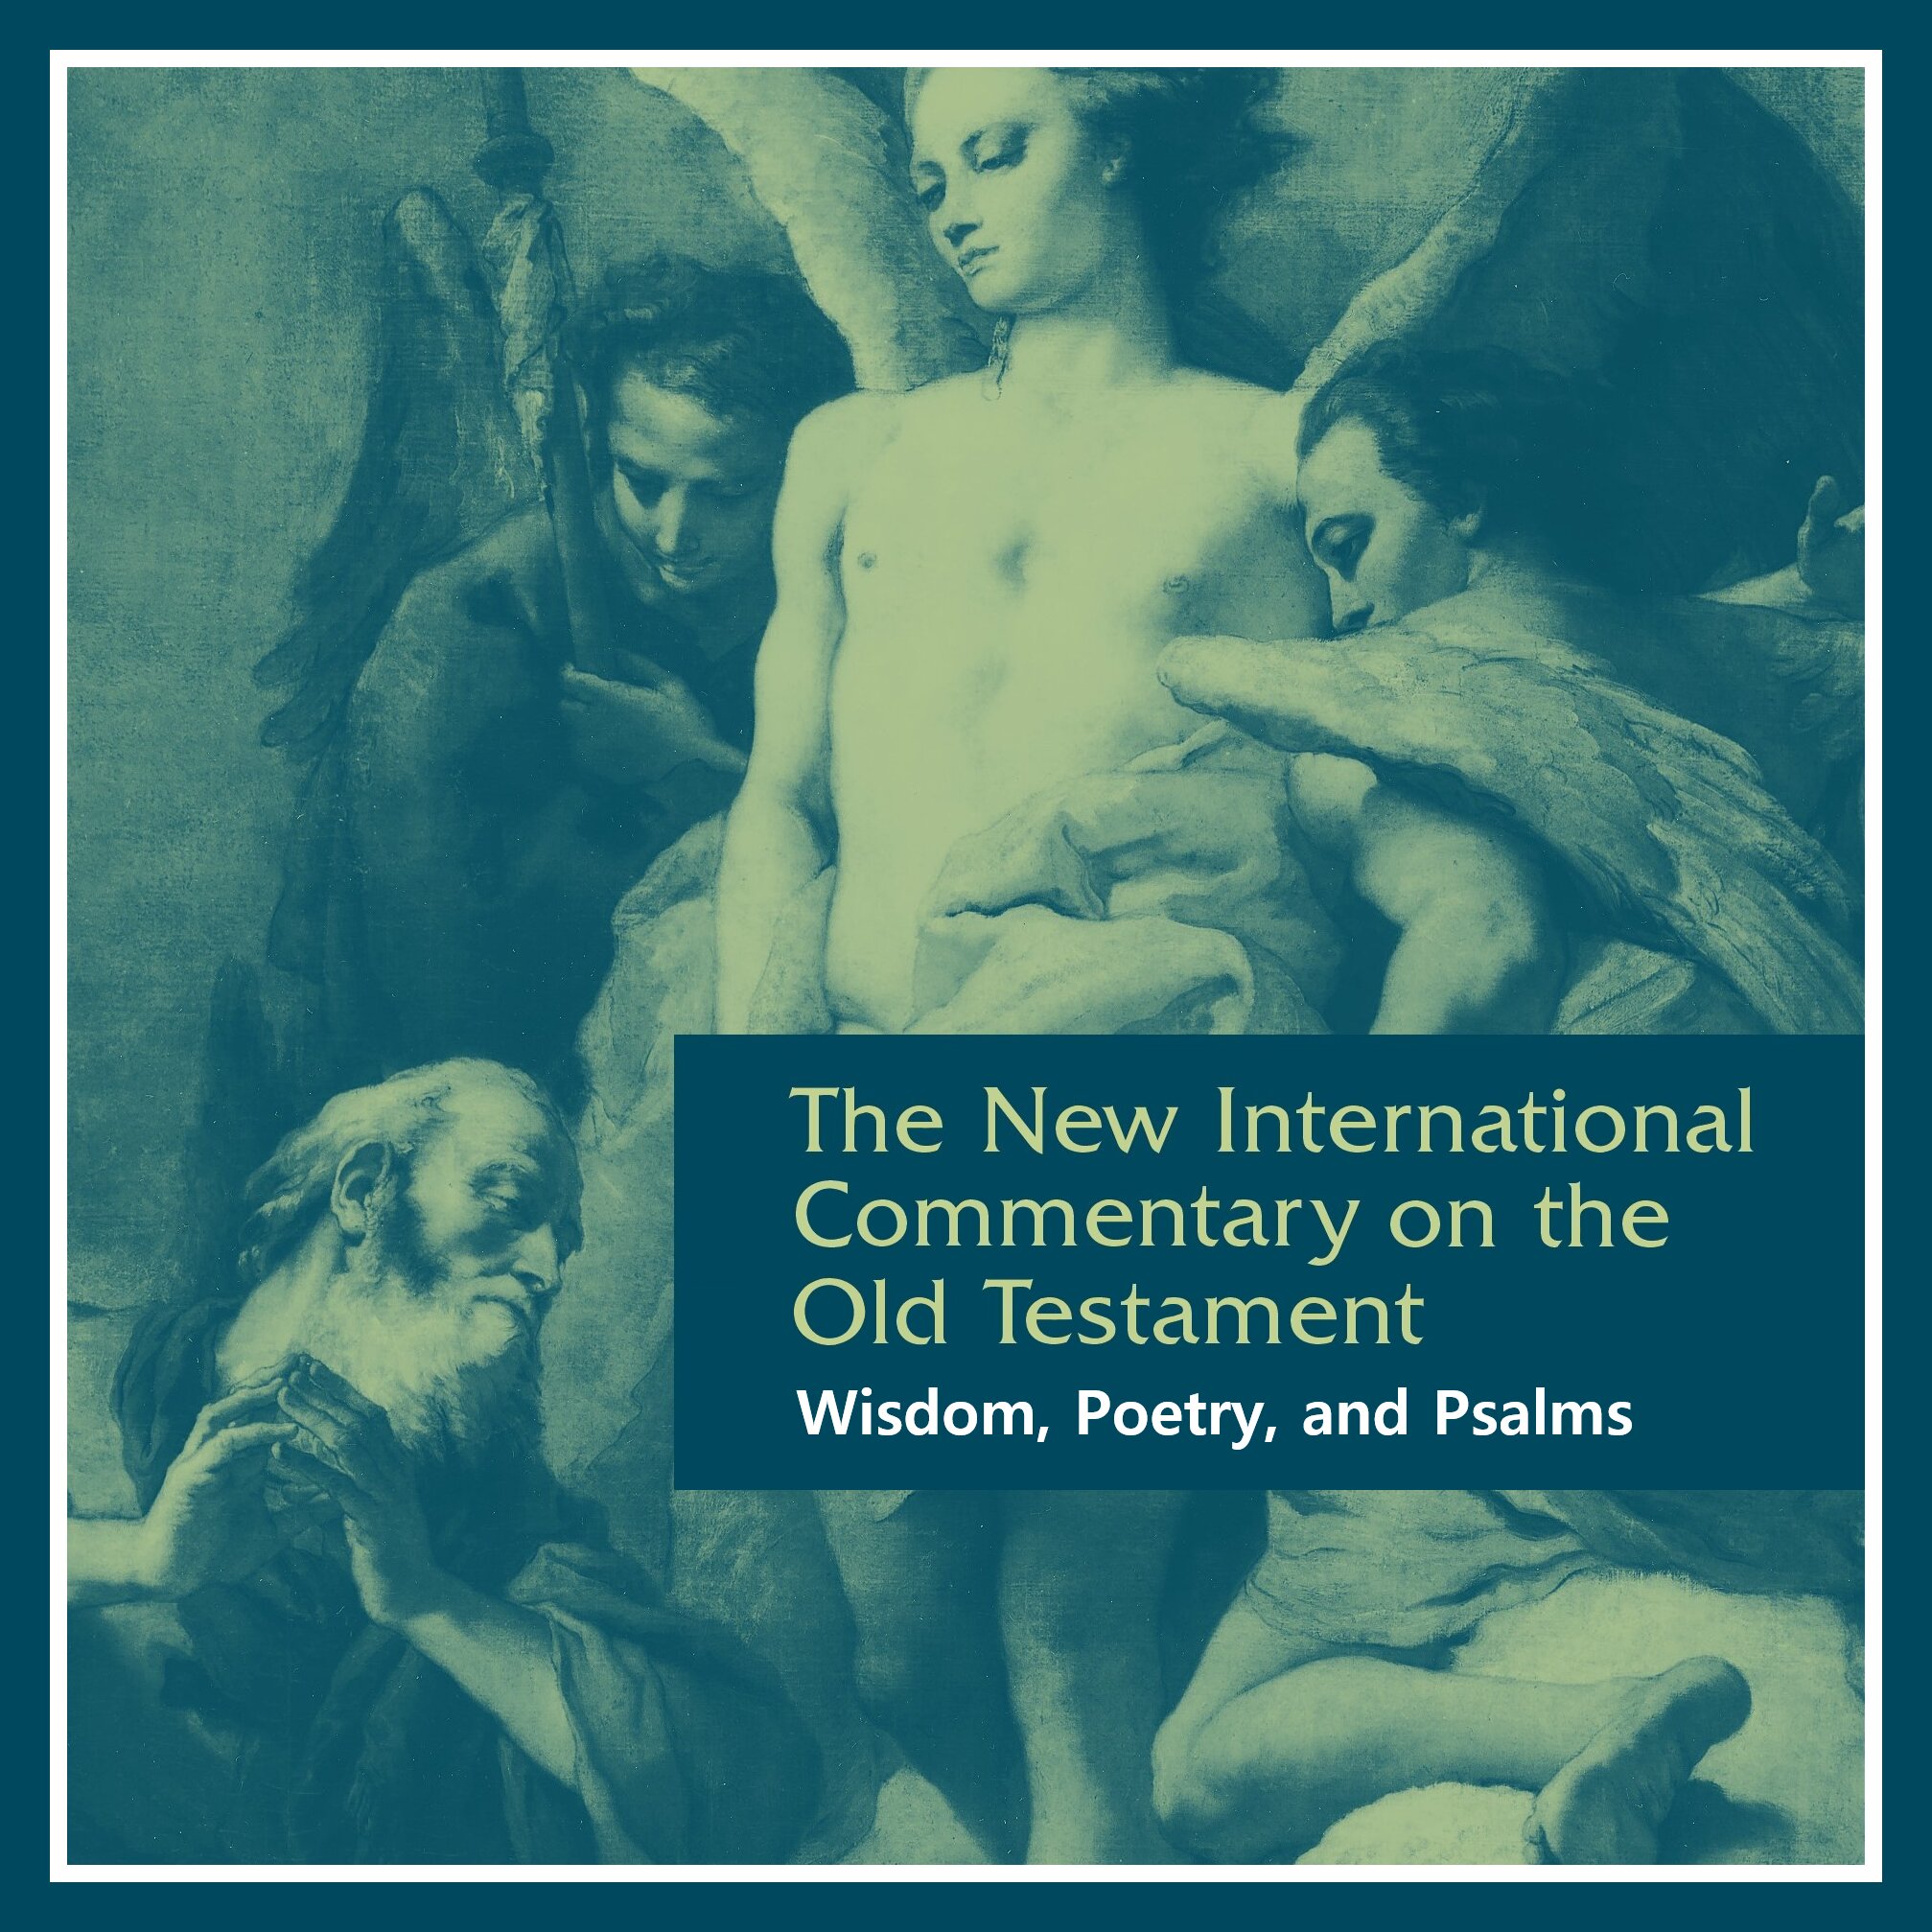 Wisdom, Poetry, and Psalms, 6 vols. (New International Commentary on the Old Testament | NICOT)